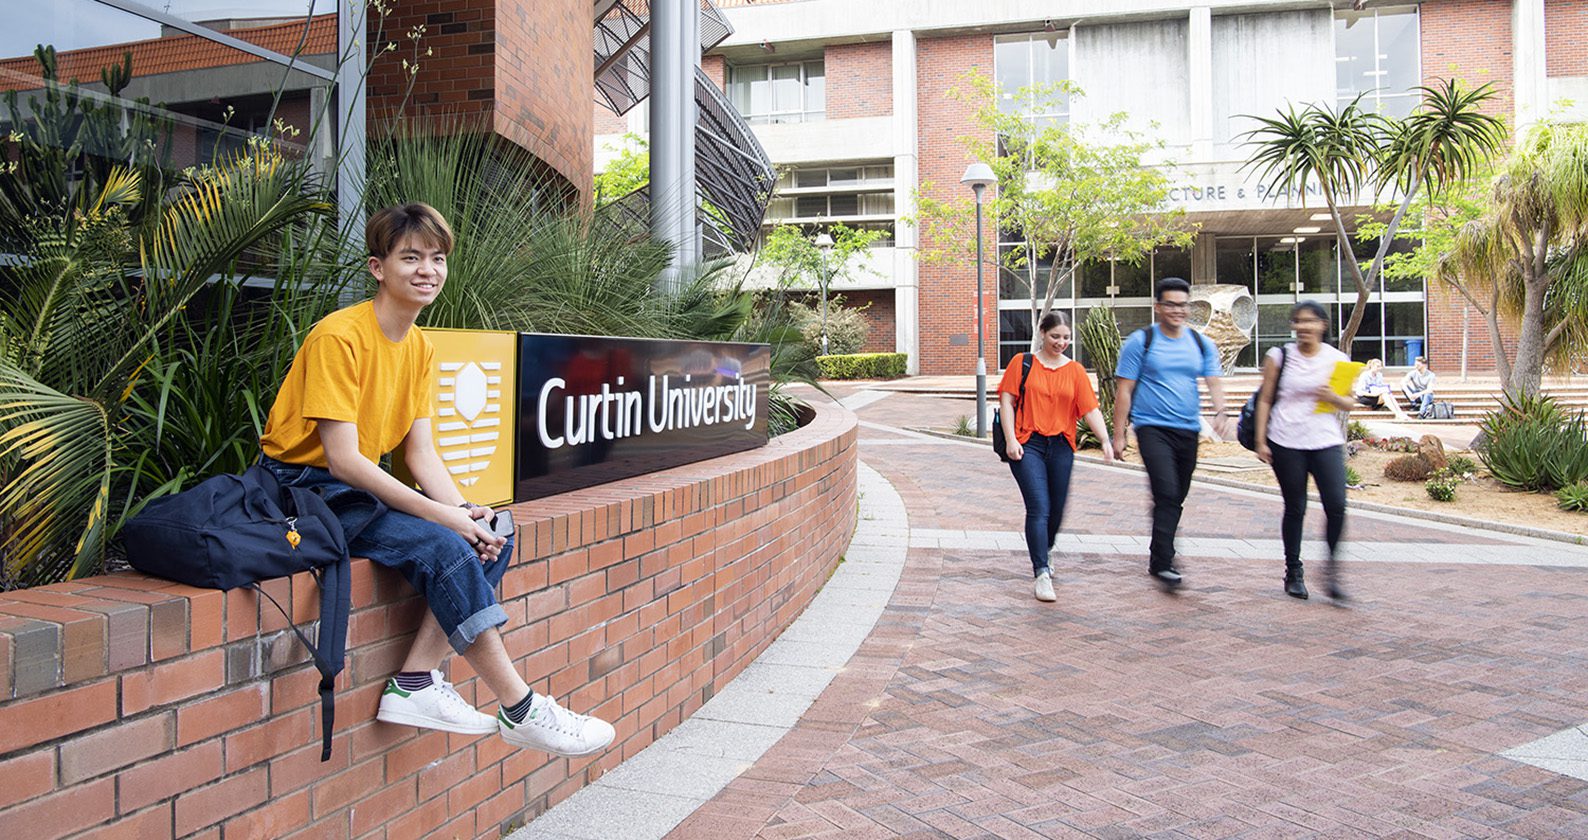 Male sitting on a retainer wall next to a Curtin university sign at Curtin campus, with people walking in the background